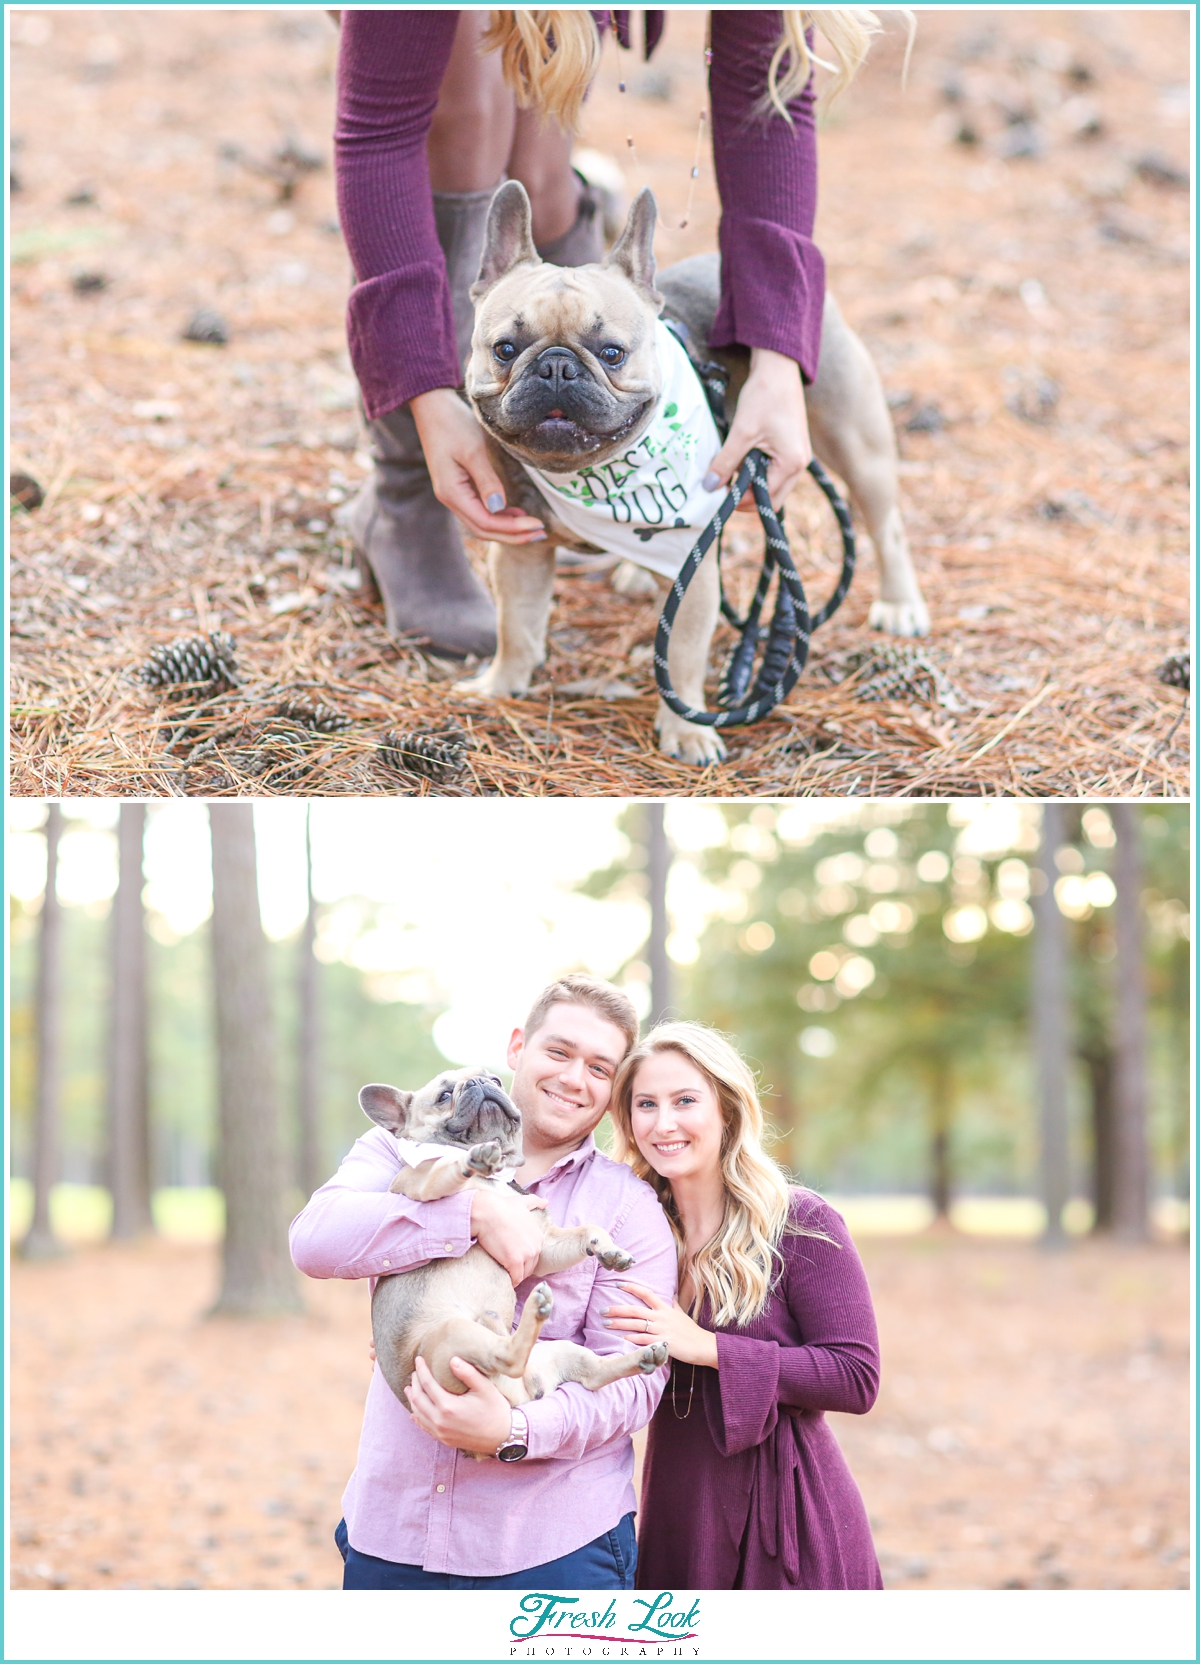 Engagement Photos with the dog